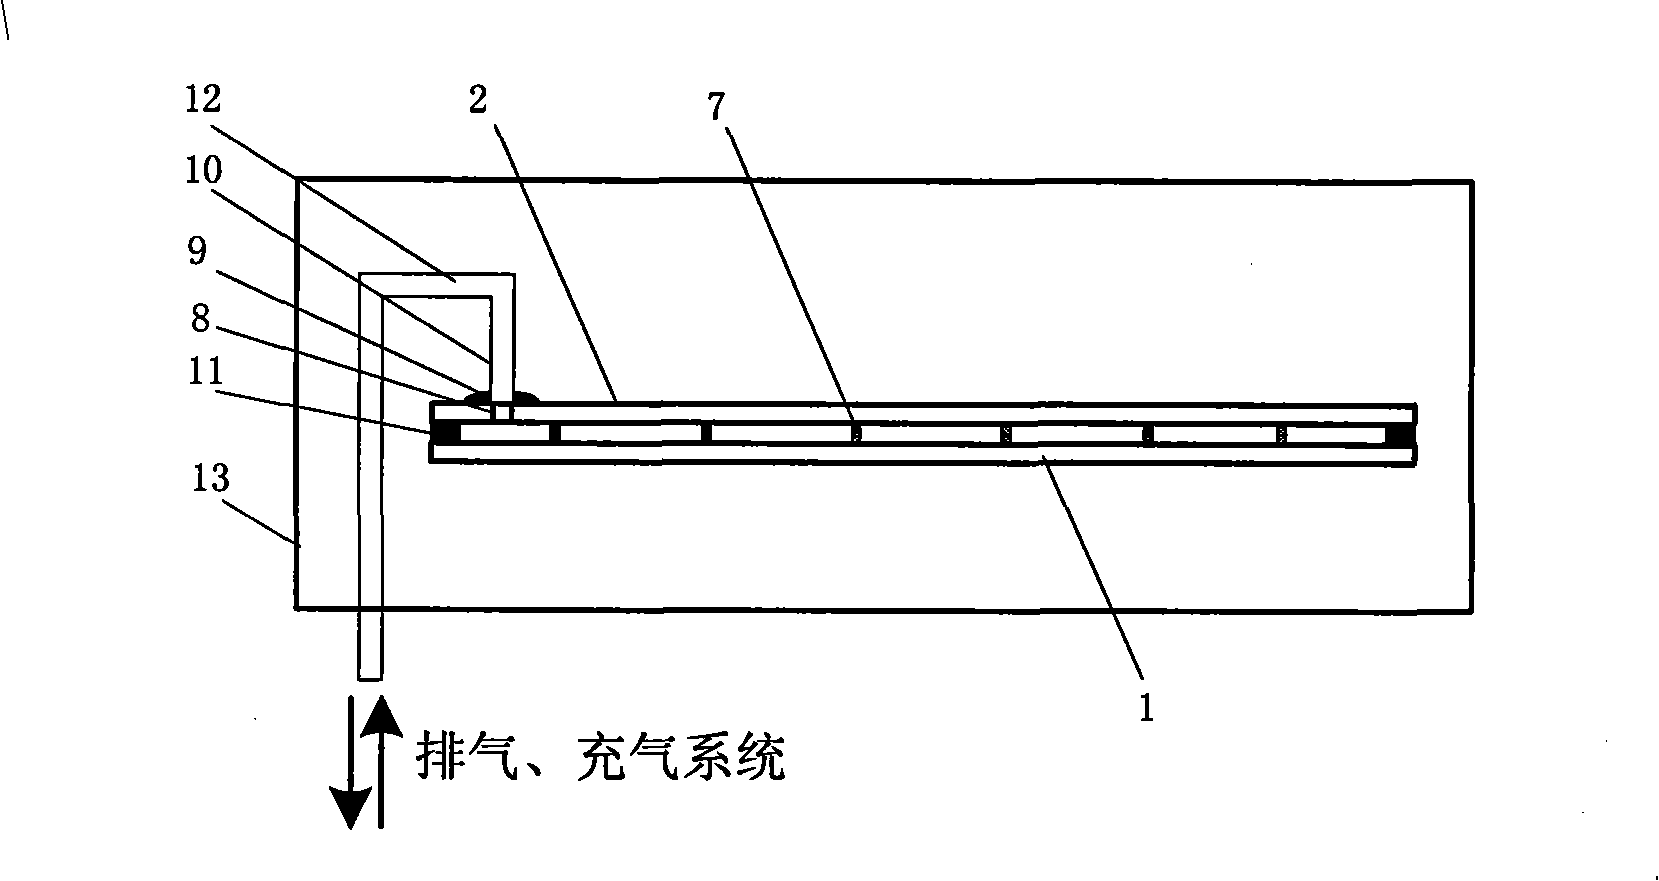 Production method of cold cathode flat light source